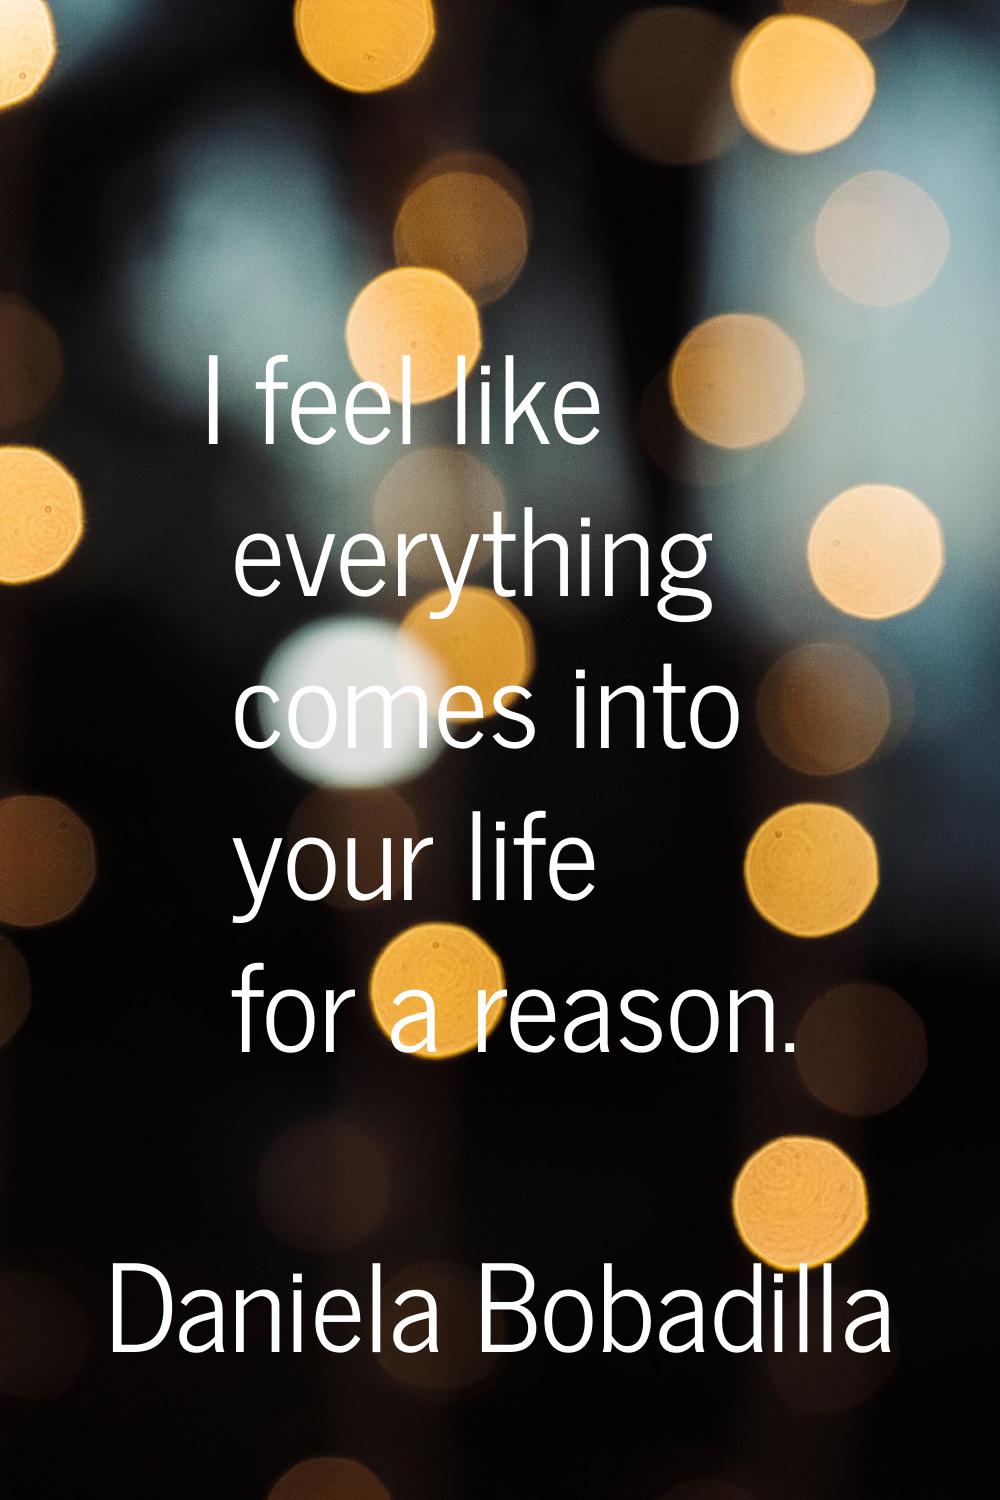 I feel like everything comes into your life for a reason.